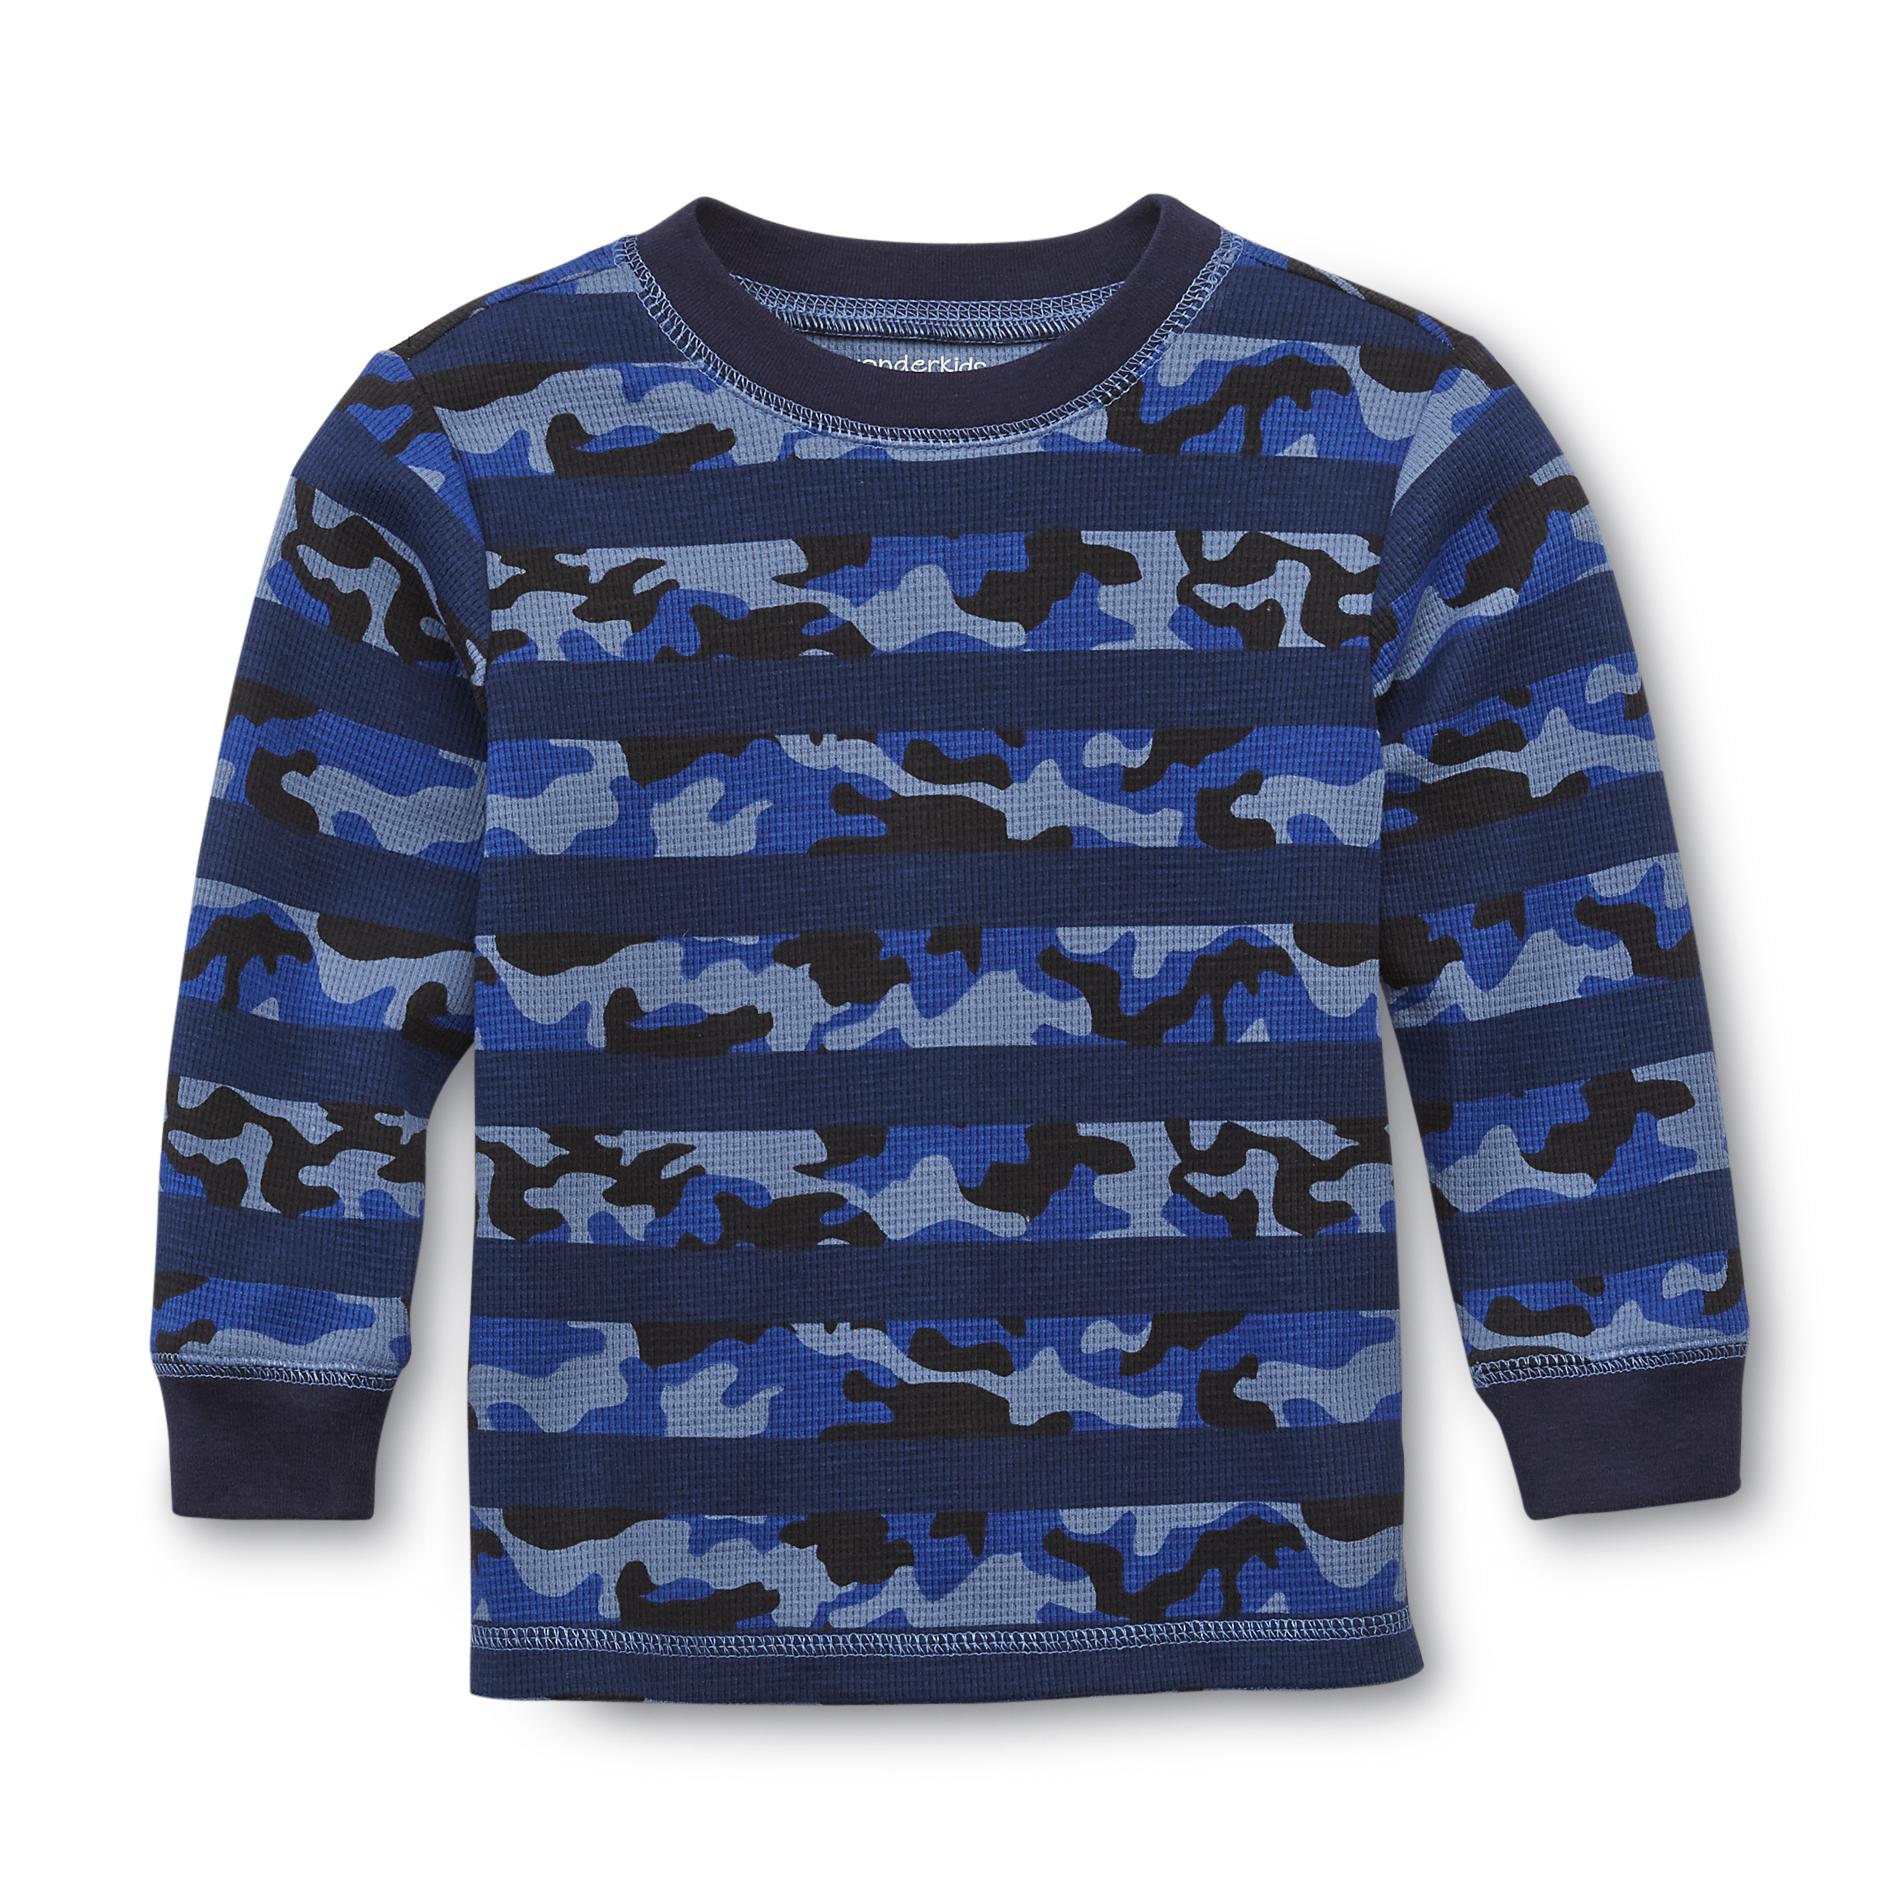 WonderKids Infant & Toddler Boy's Thermal Shirt - Camouflage & Striped